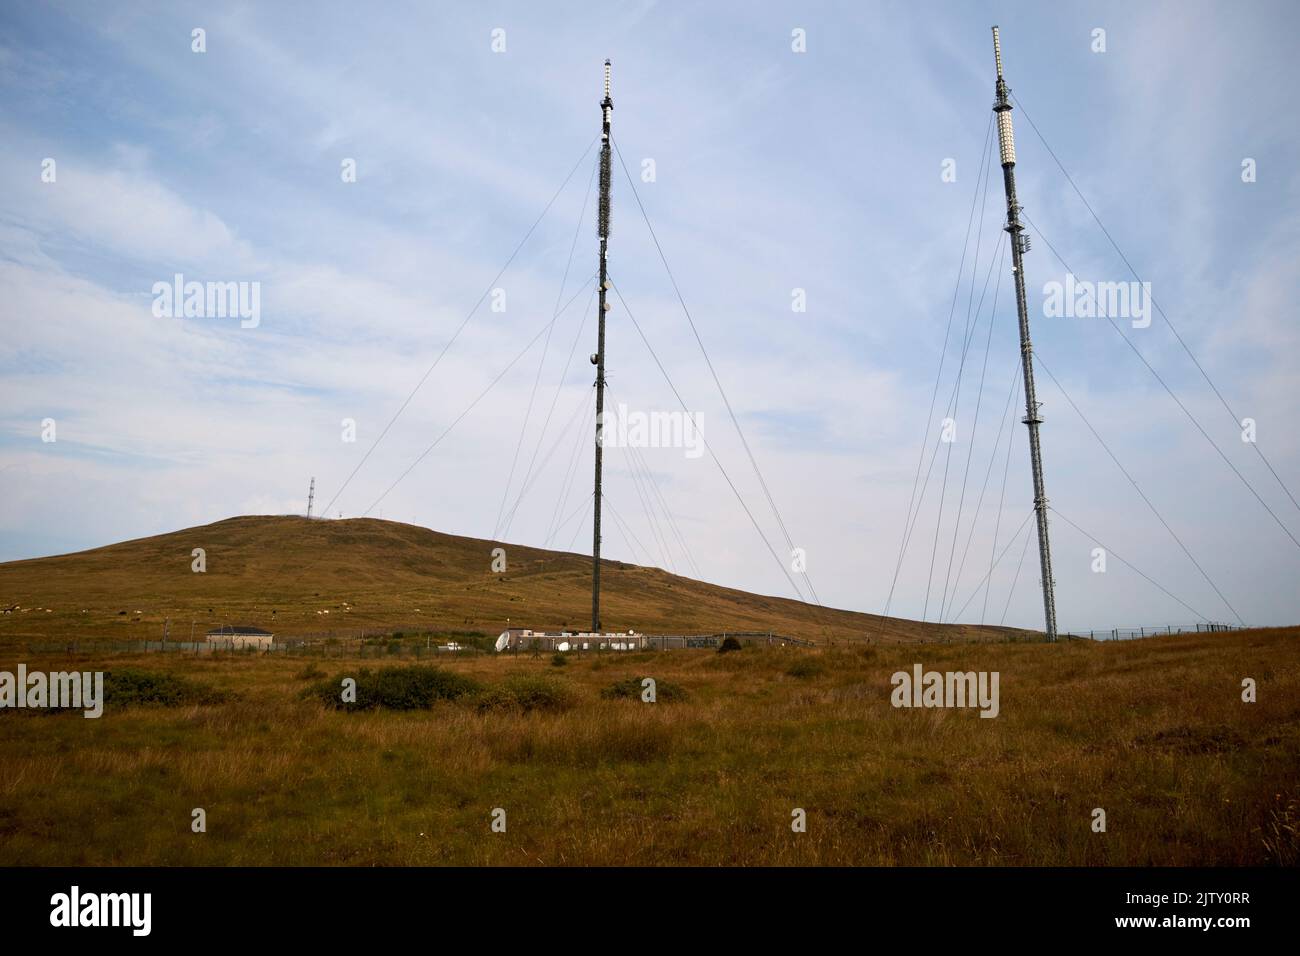 Black mountain transmitting station with the peak of divis mountain in the background in divis and black mountain belfast hills range belfast northern Stock Photo